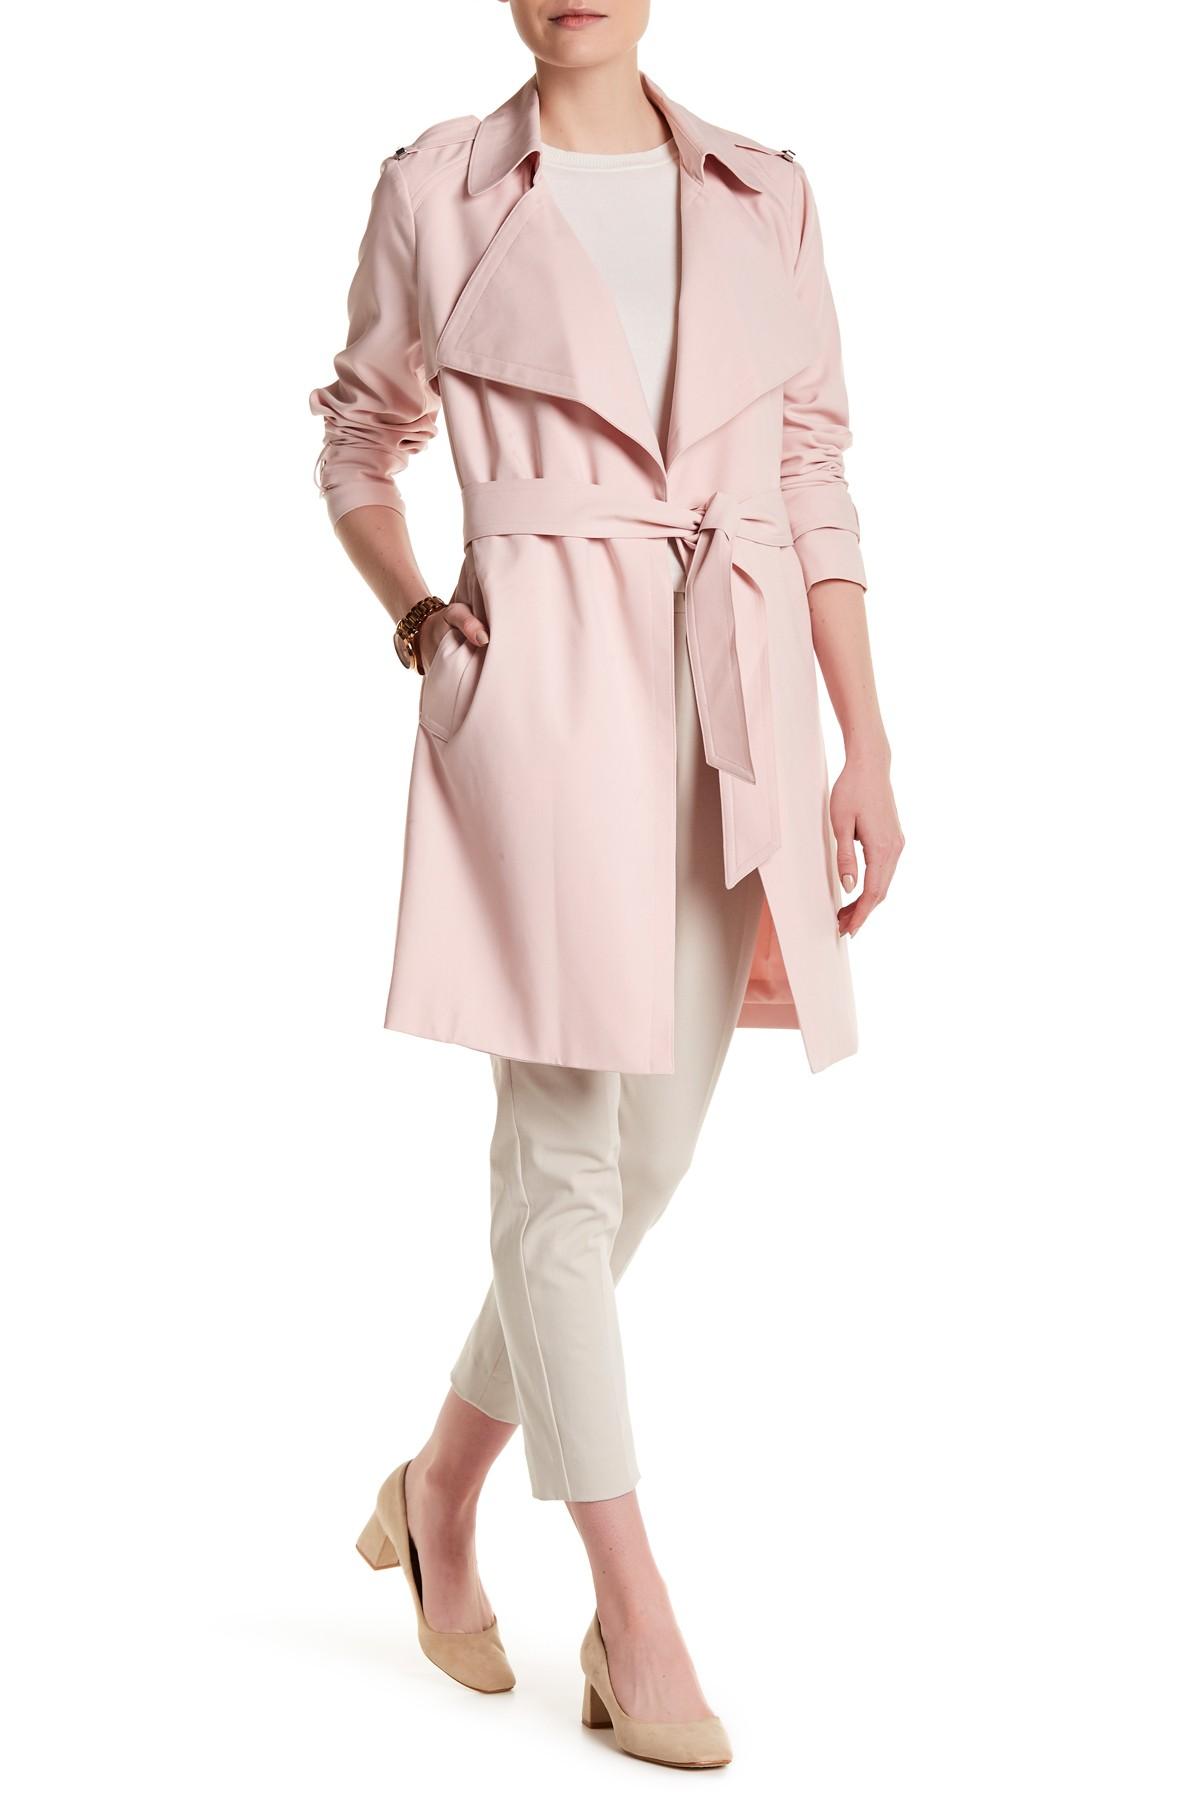 Lyst - Michael Michael Kors Belted Trench Coat in Pink